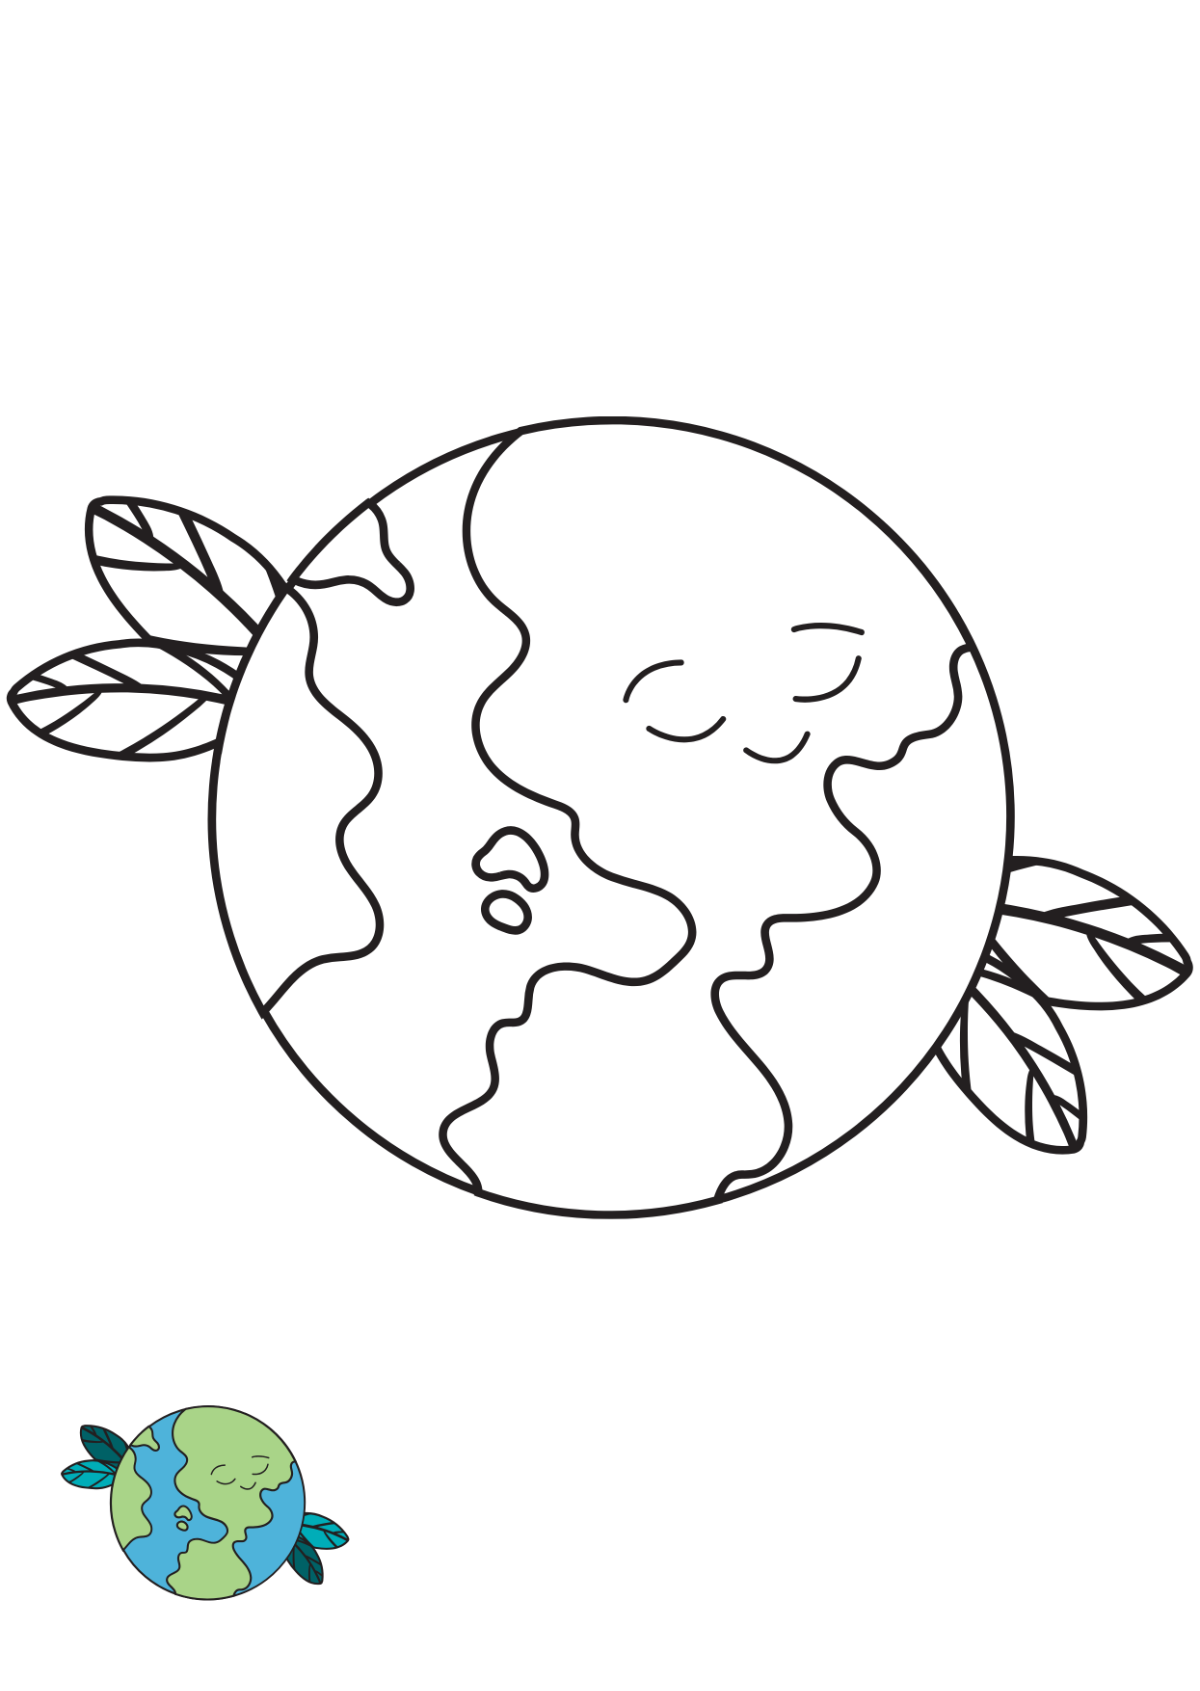 Preschool Earth Day Coloring Page Template